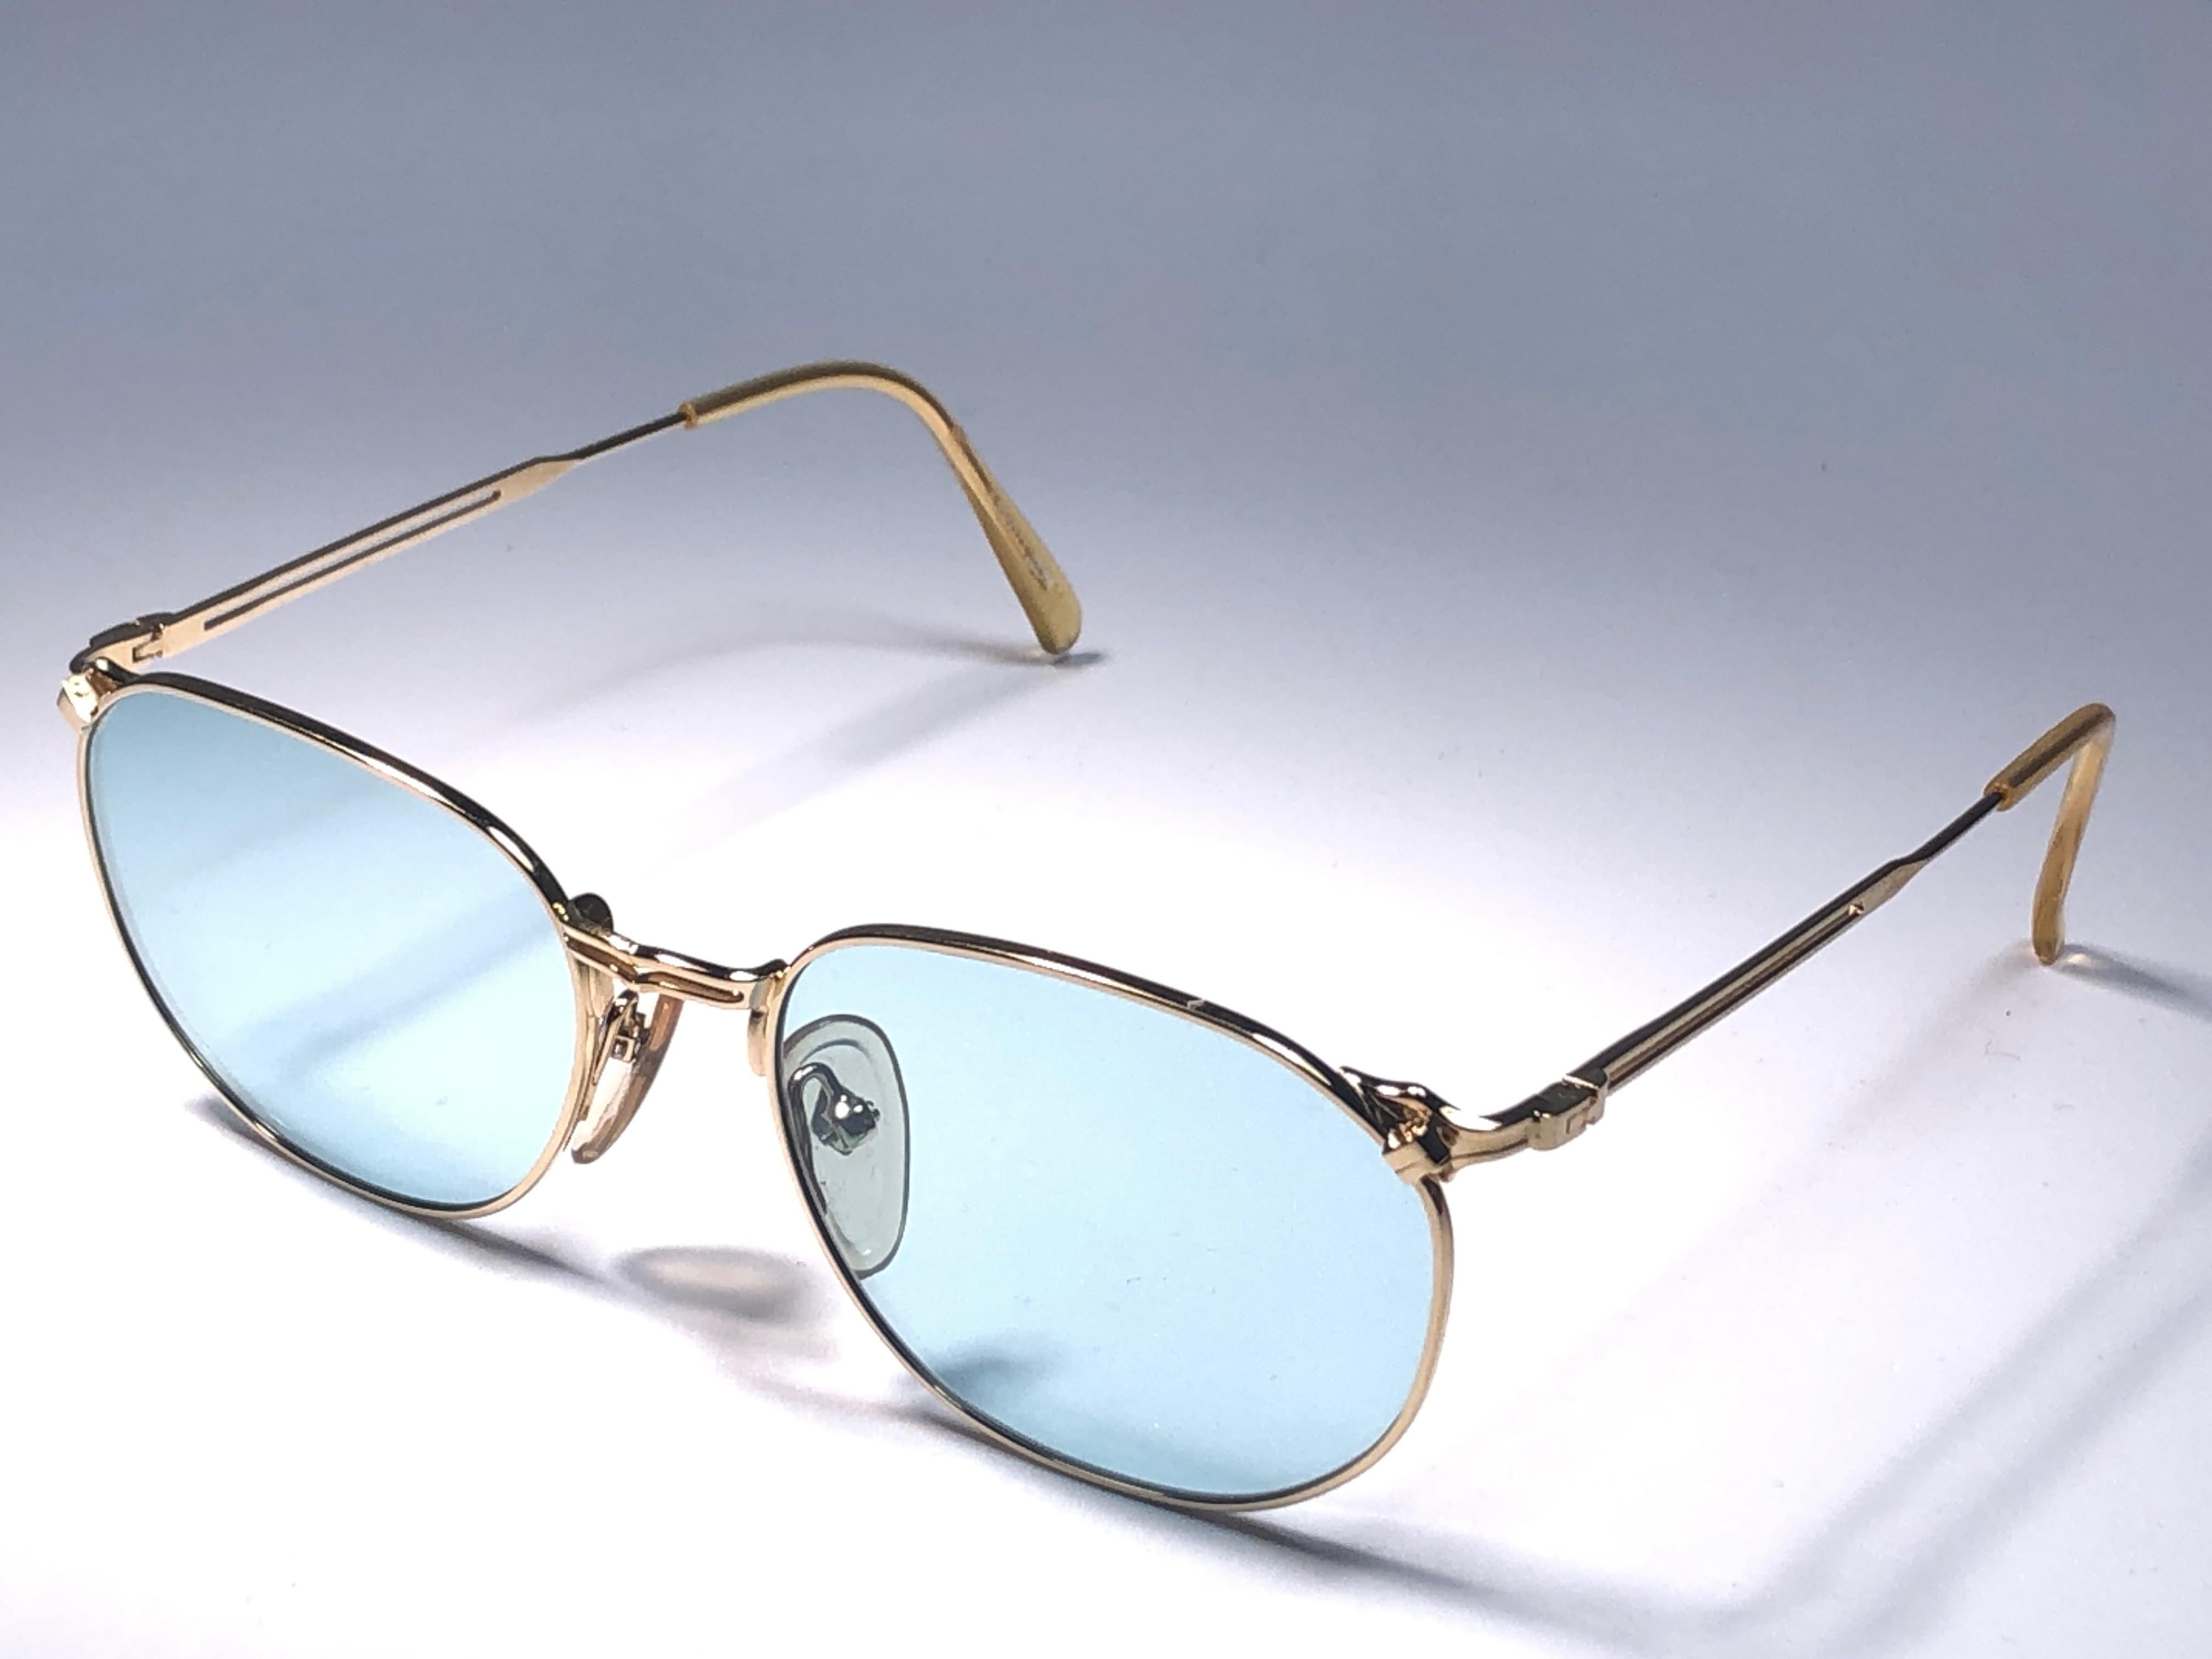 New Jean Paul Gaultier Medium gold frame sunglasses.
Light green lenses that complete a ready to wear JPG look.

Amazing design with strong yet intricate details.
Design and produced in the 1990's.
New, never worn or displayed.
This item may show